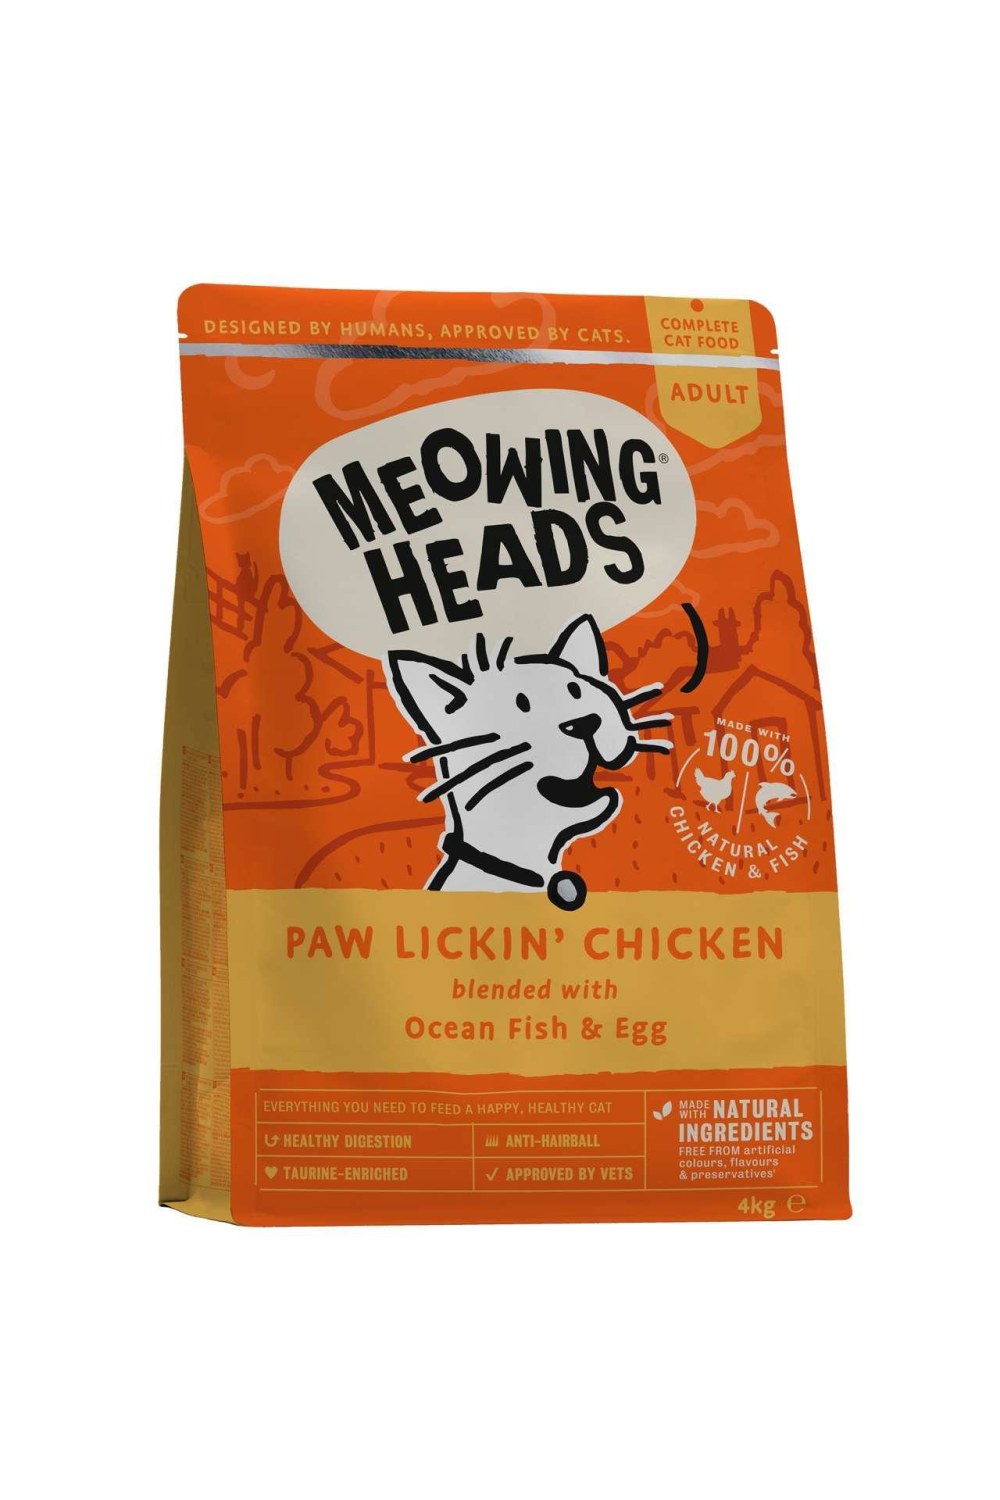 Meowing Heads Paw Lickin Chicken Cat Food (Brown) (8.8lbs)